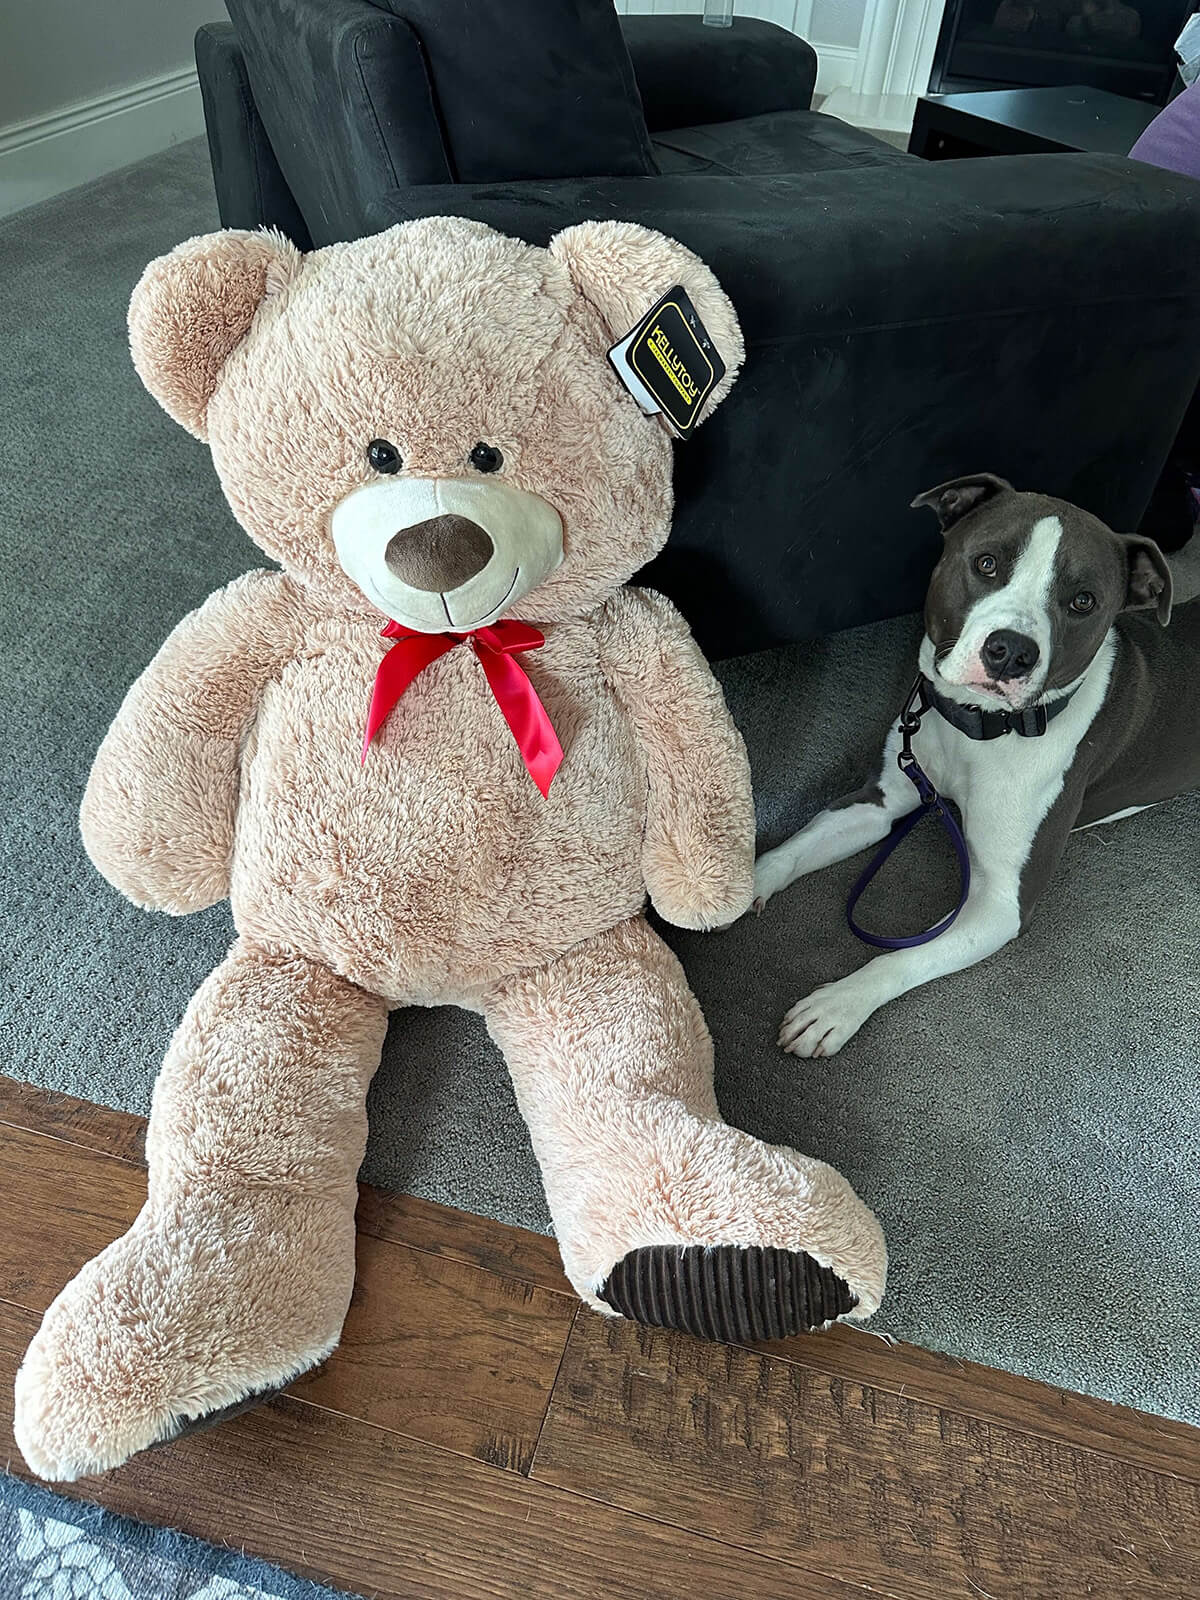 our foster dog and my giant teddy bear